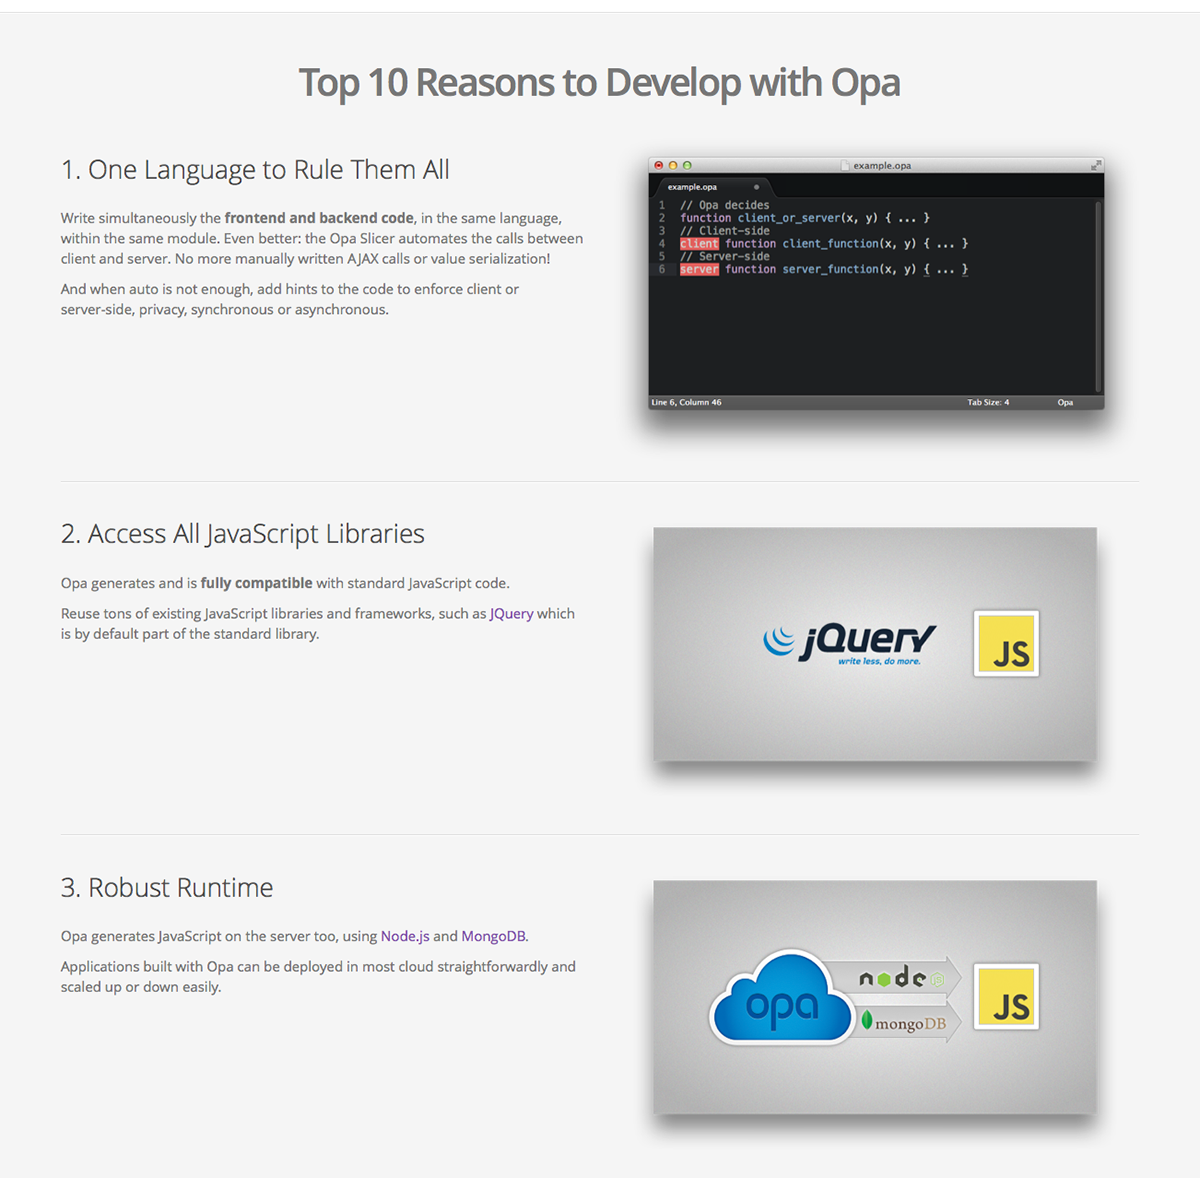 Opa  opalang  website ui design UX design concept development github pages Jekyll